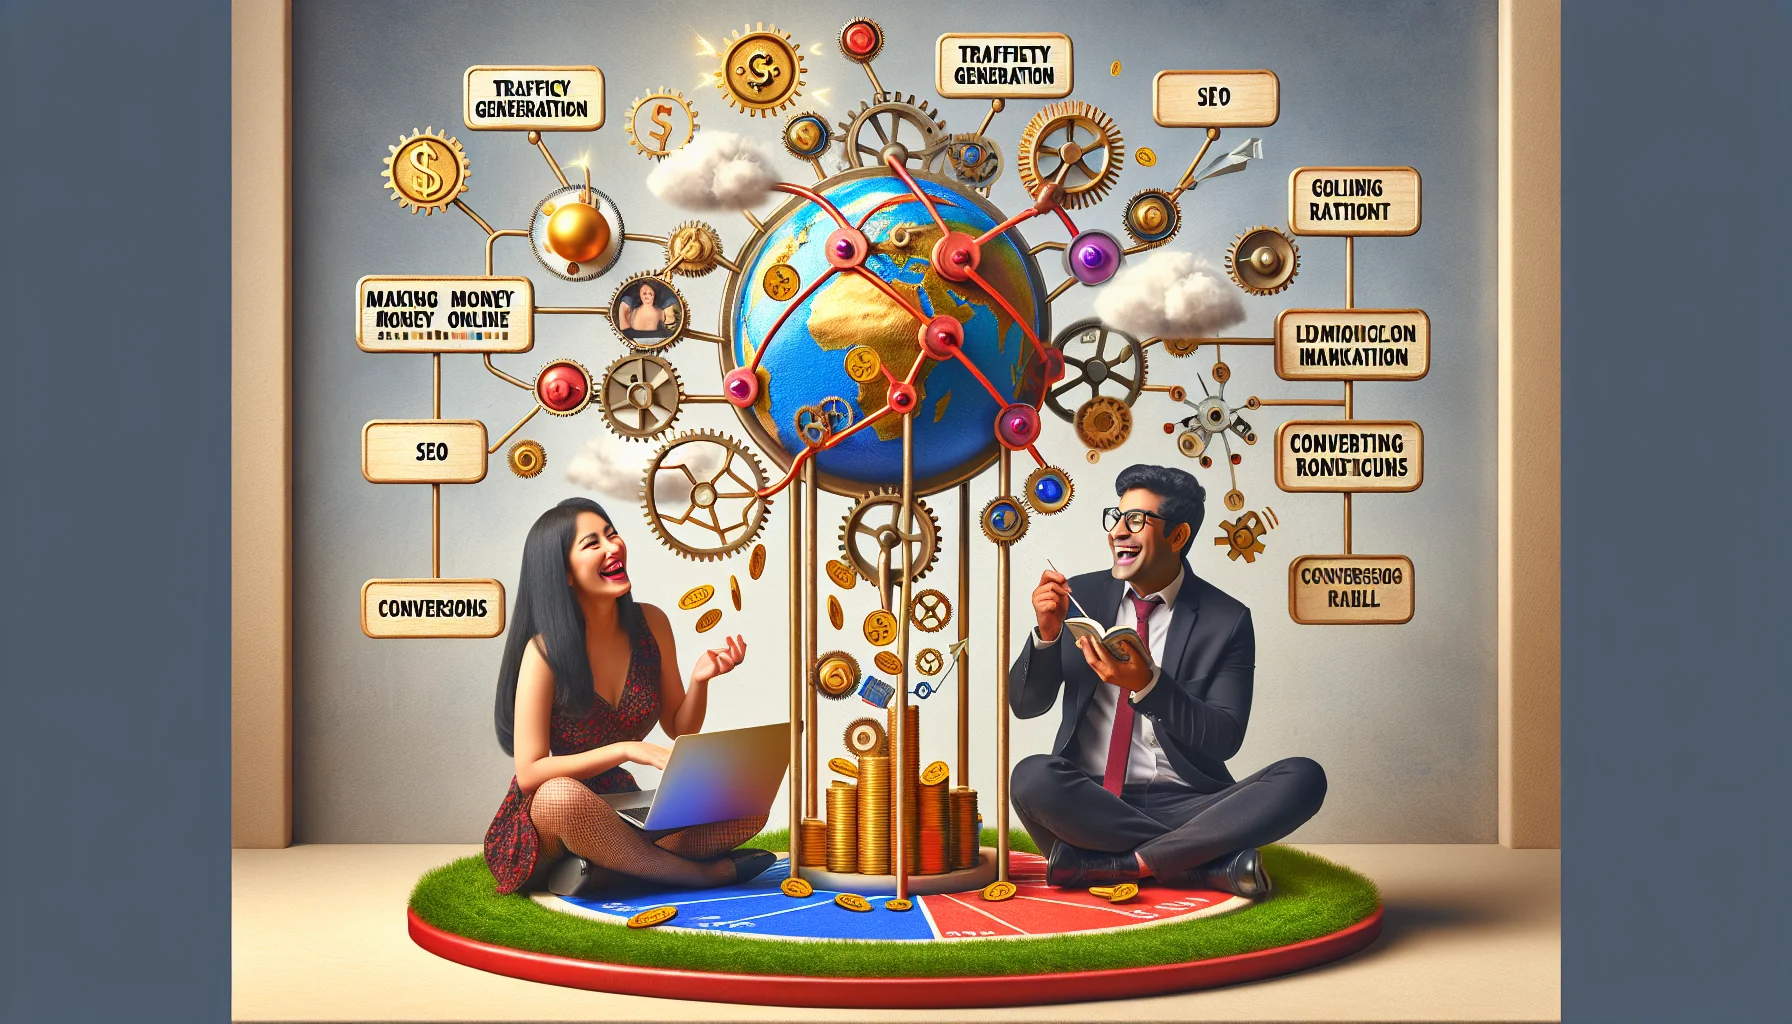 Create a humorous, lifelike image tableau that visualizes the secrets of affiliate marketing. Display a South Asian man and a Hispanic woman cheerfully engrossed in an animated discussion about strategies, surrounded by symbols representing the internet, such as a dimensional globe overlaid with network nodes. Key concepts like 'Making Money Online', 'Traffic Generation', 'SEO' and 'Conversions' could appear as doors, gears or levers in a whimsical, Rube Goldberg-style machine. Money sprouting from a laptop and gold coins showering from a cloud could underline the rewarding returns of online marketing. Use lighter tones and rich colors.